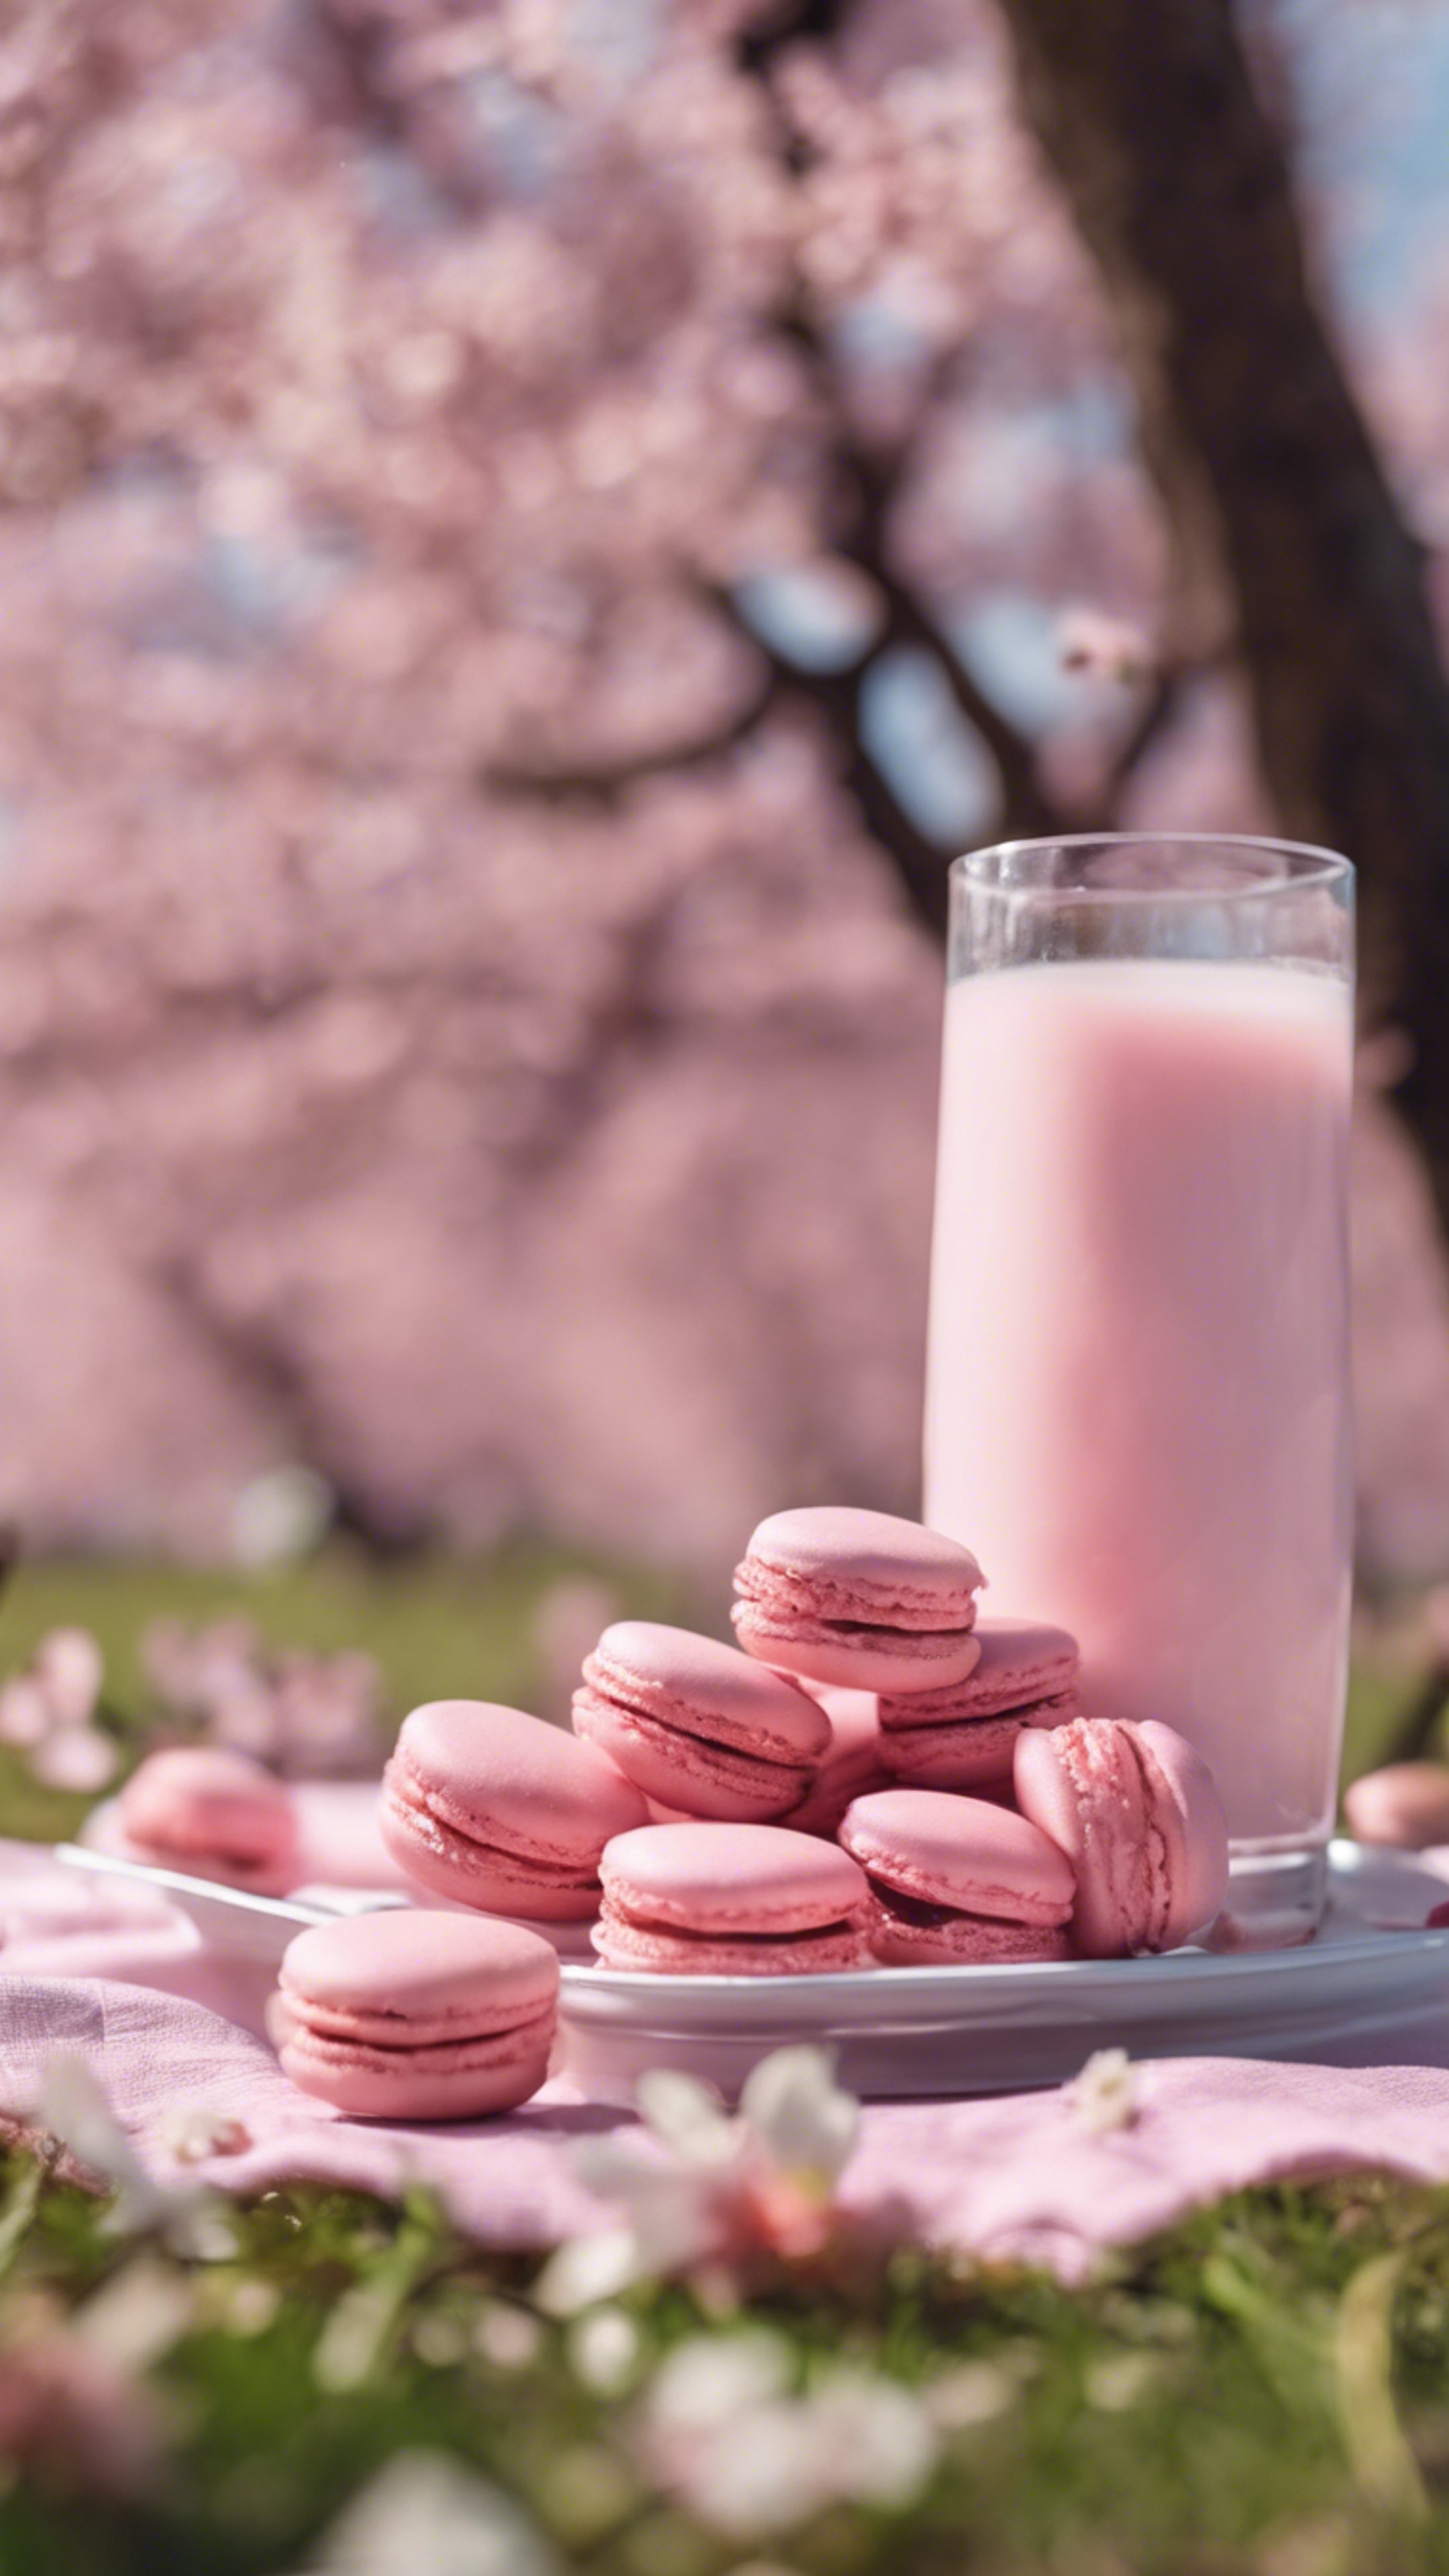 A picnic under the cherry blossoms with pink macaroons and strawberry milk. ផ្ទាំង​រូបភាព[97540e72ef6b46bcbaa8]